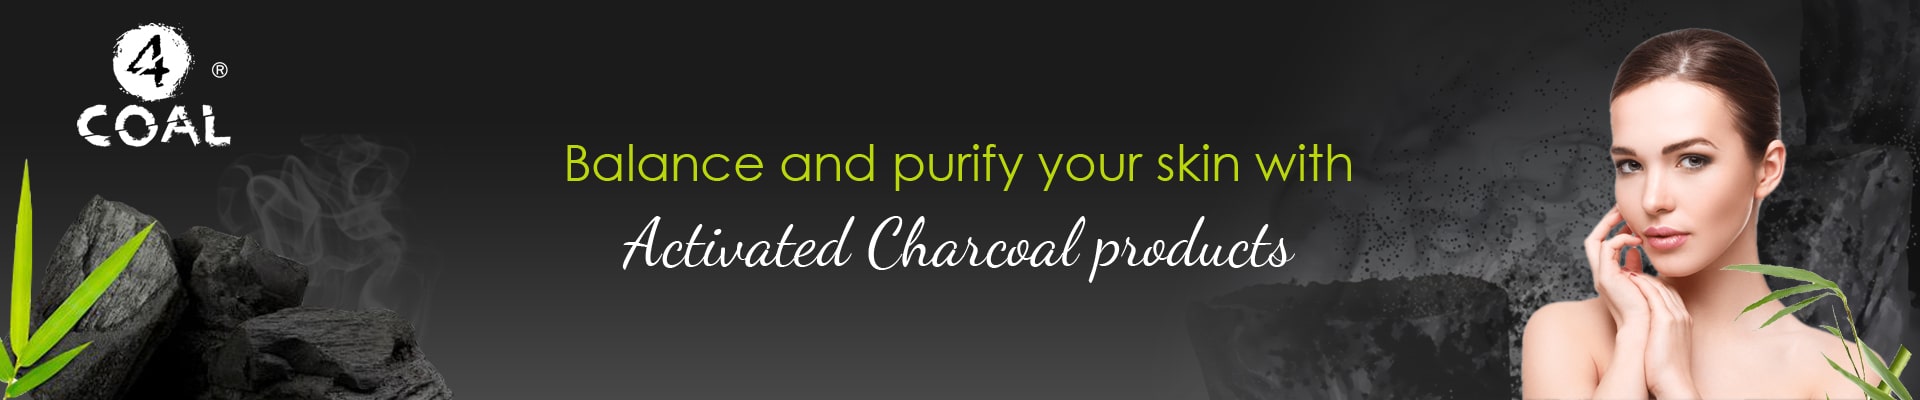 4coal - Beauty Relay London Activated Charcoal Product Range